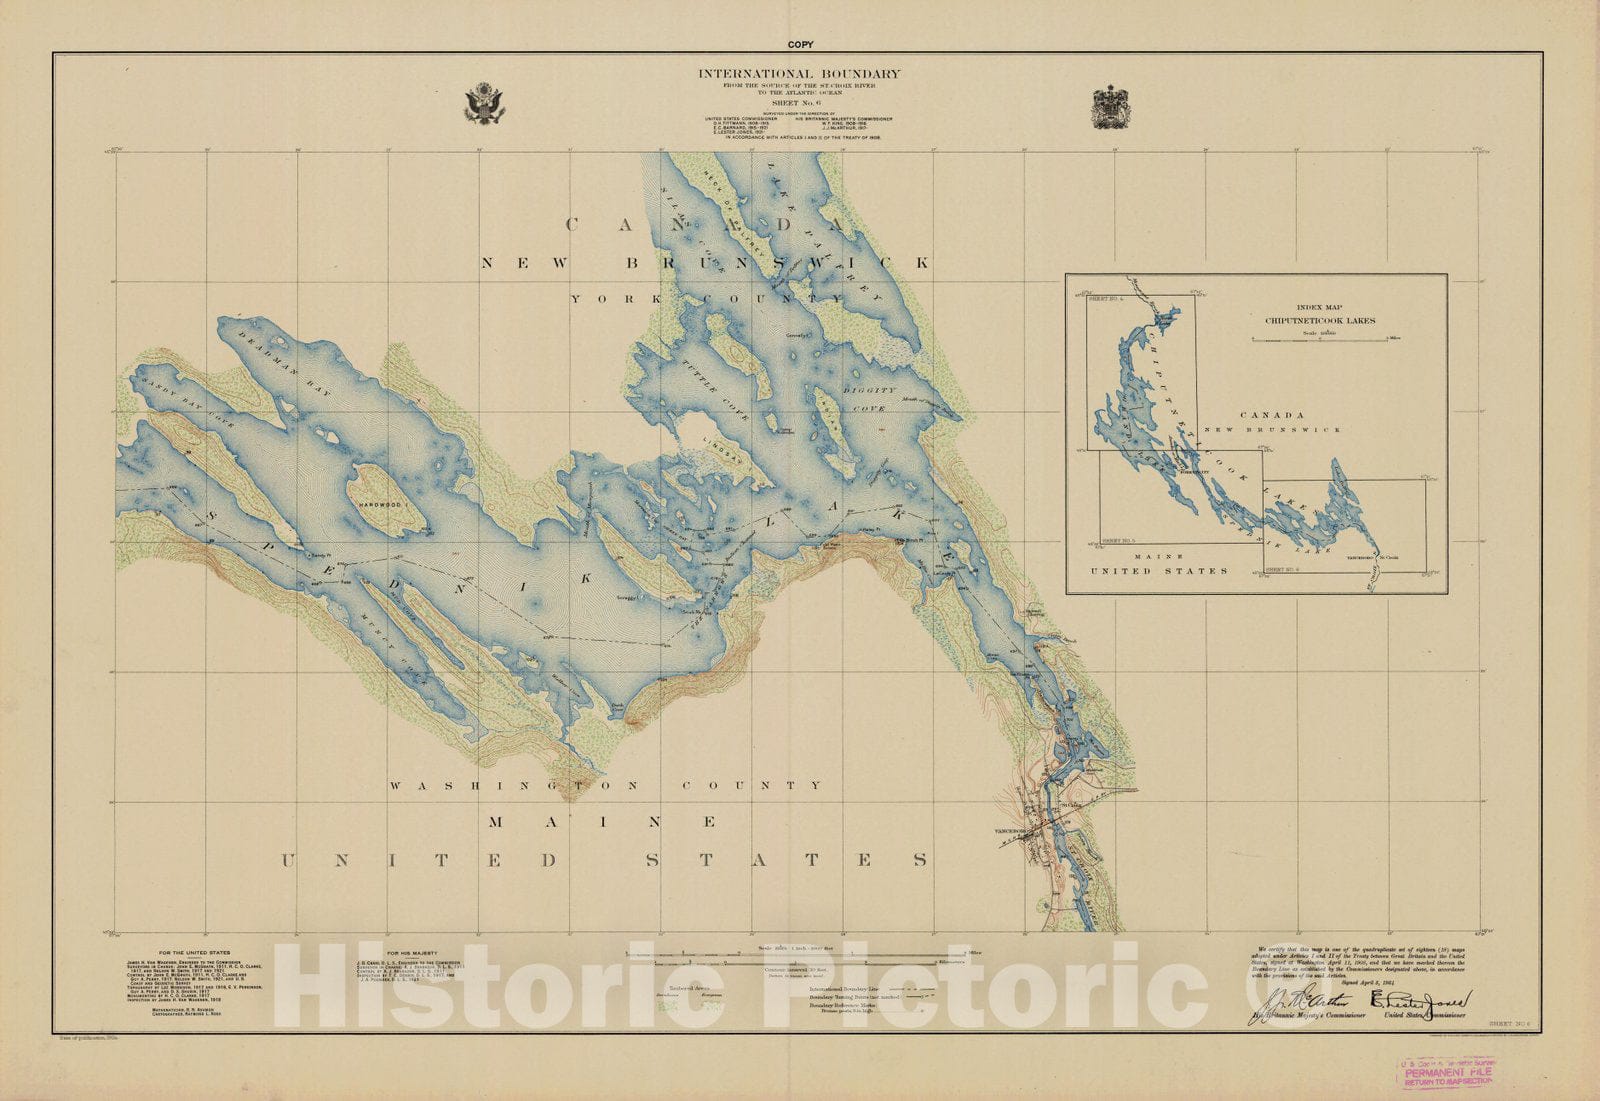 Historic Nautical Map - International Boundary, From The Source Of The St. Croix River To The Atlantic Ocean, Sheet No. 6, ME, 1924 NOAA Topographic - Vintage Wall Art